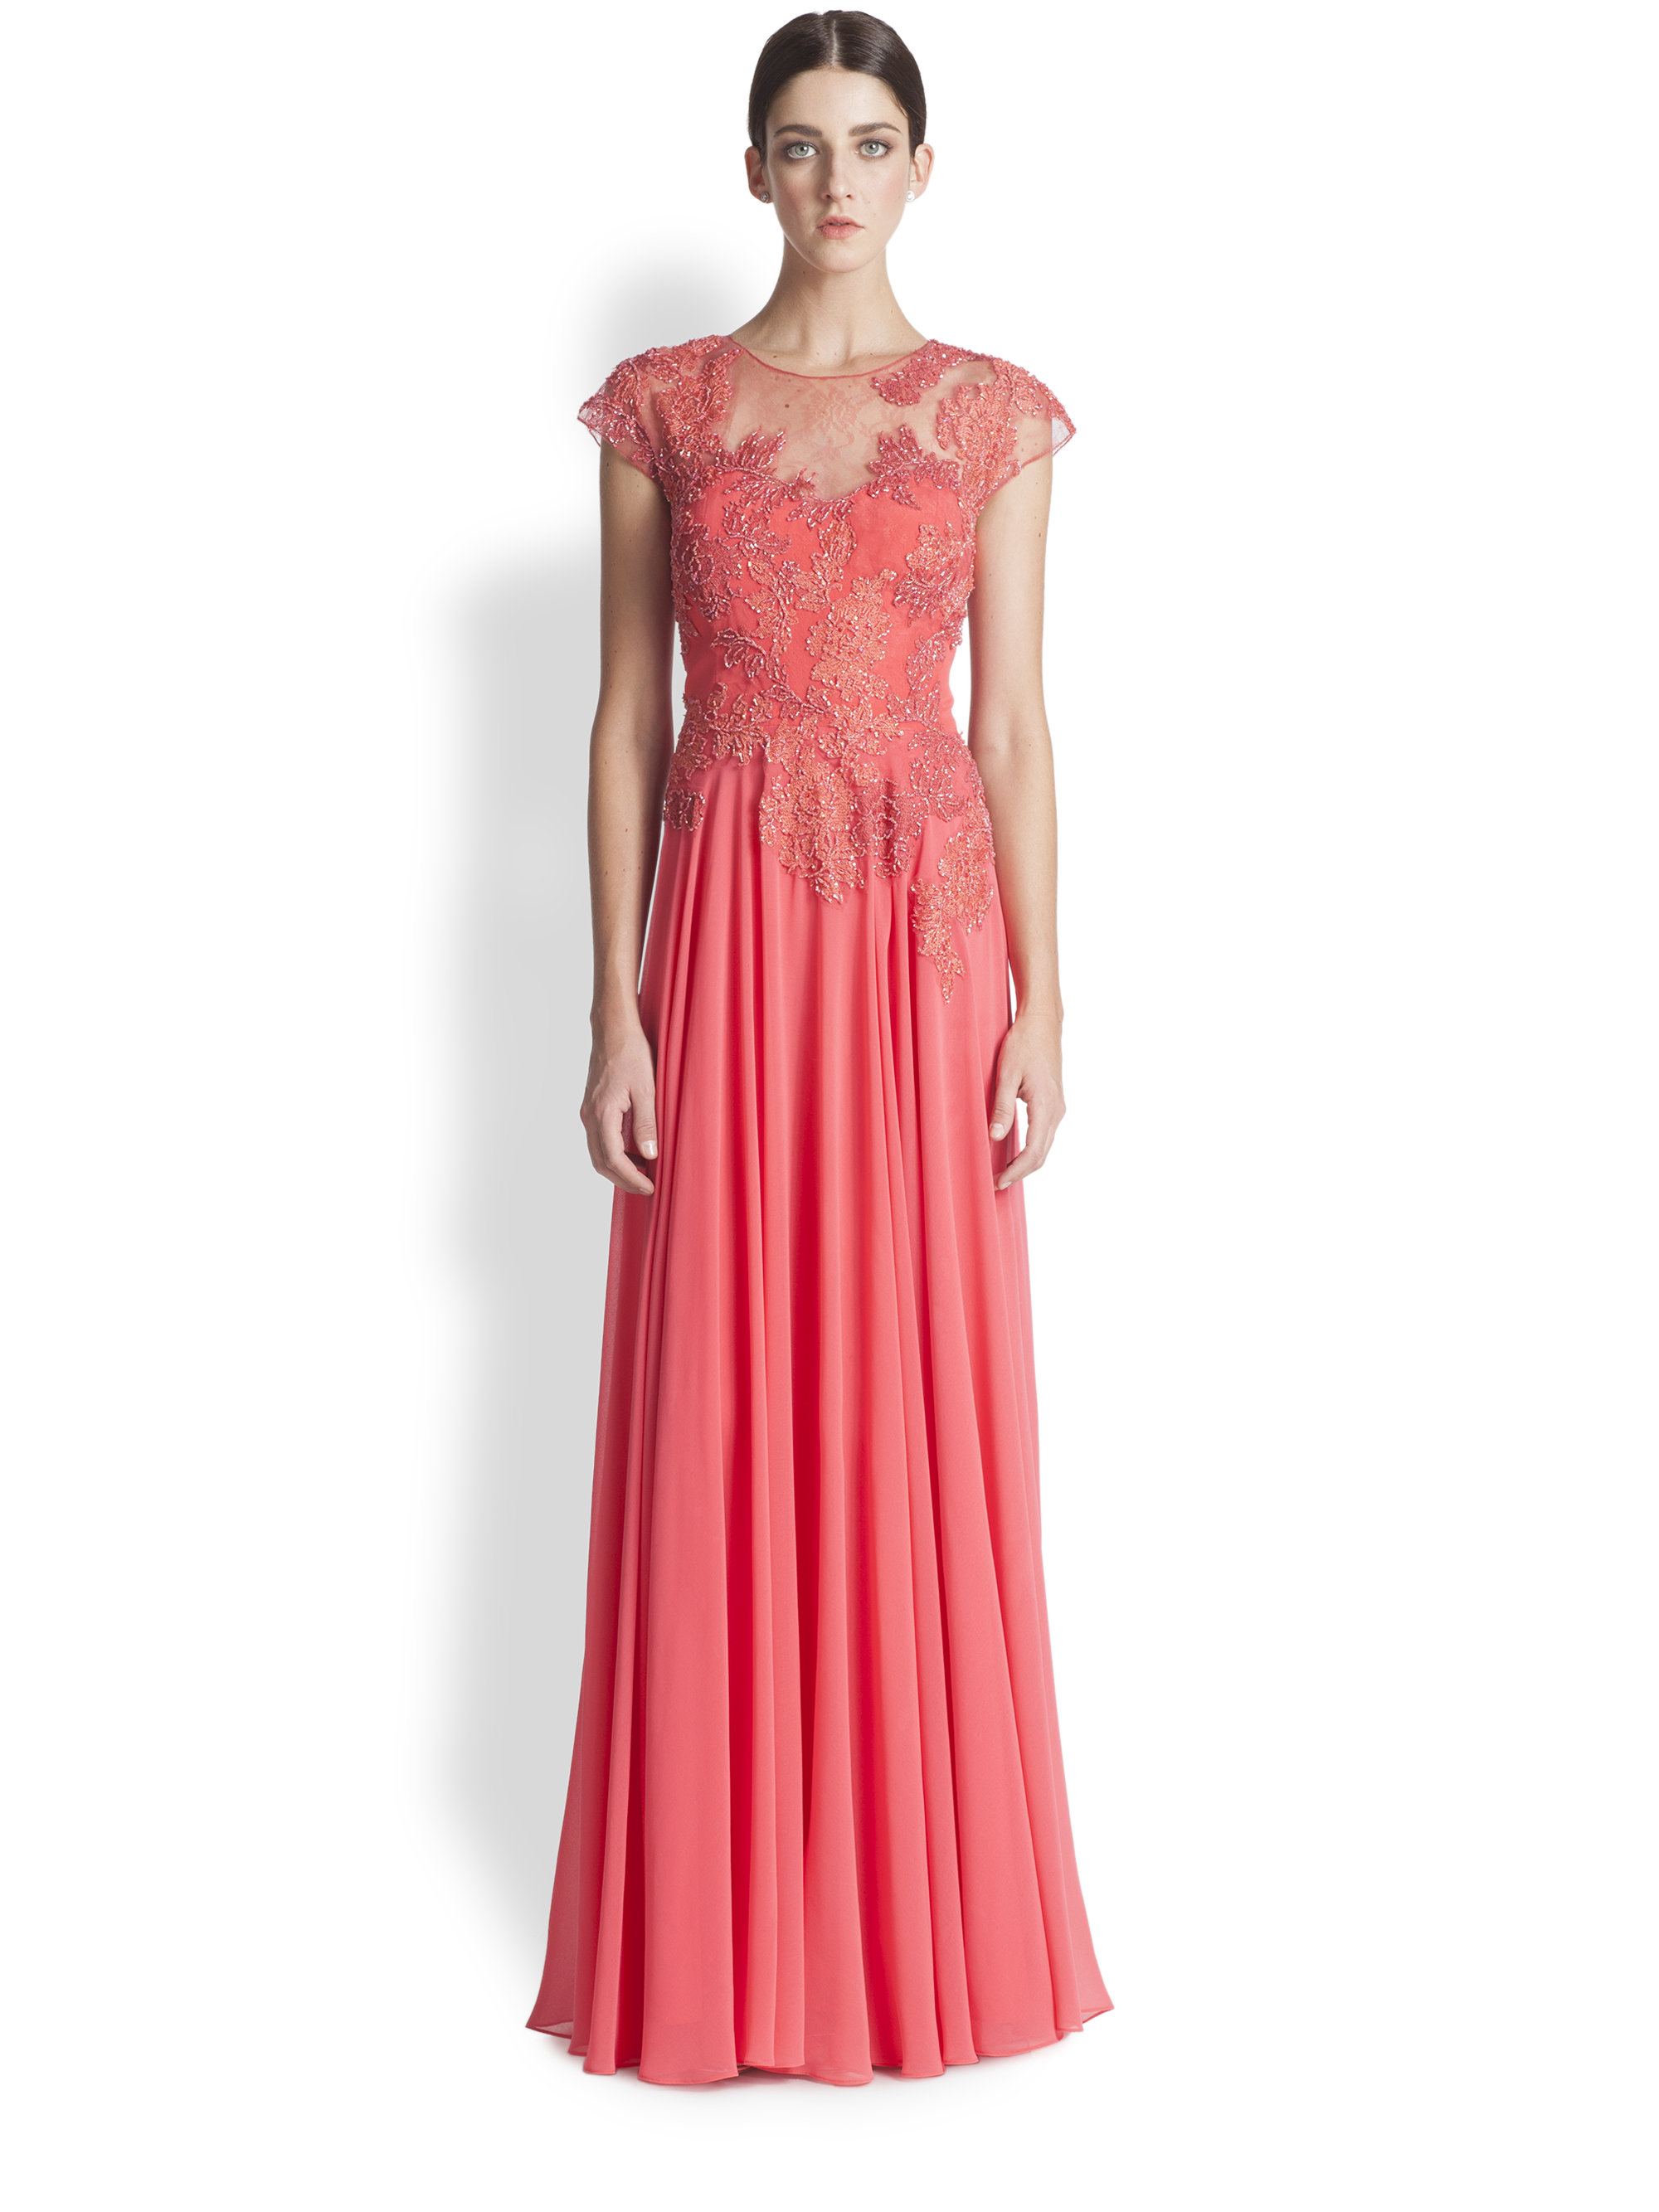 Lyst - Teri Jon Lace Applique Gown in Pink